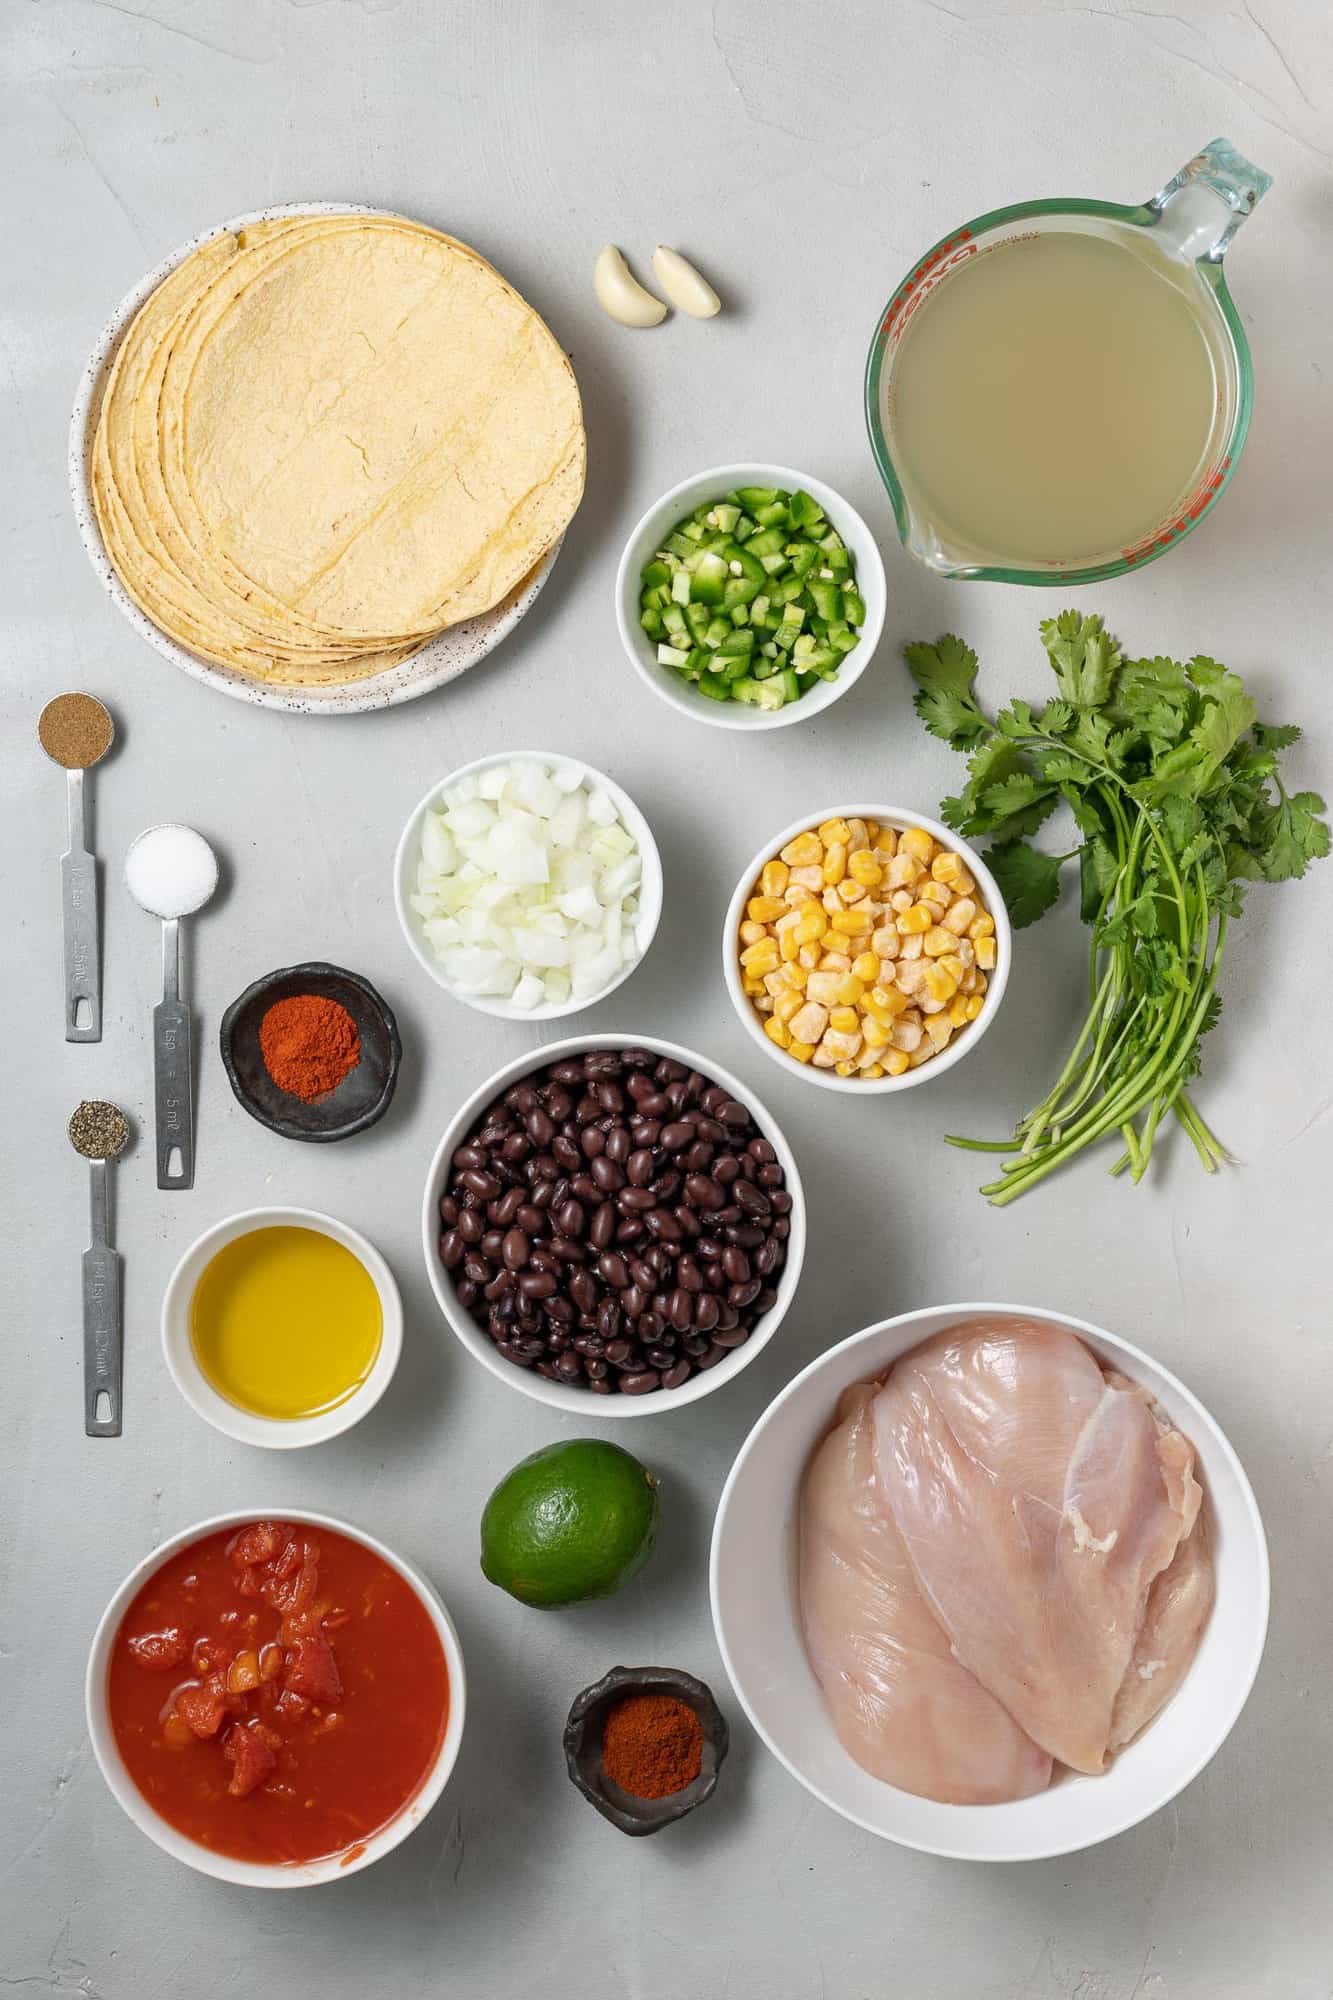 Overhead view of ingredients needed for recipe.